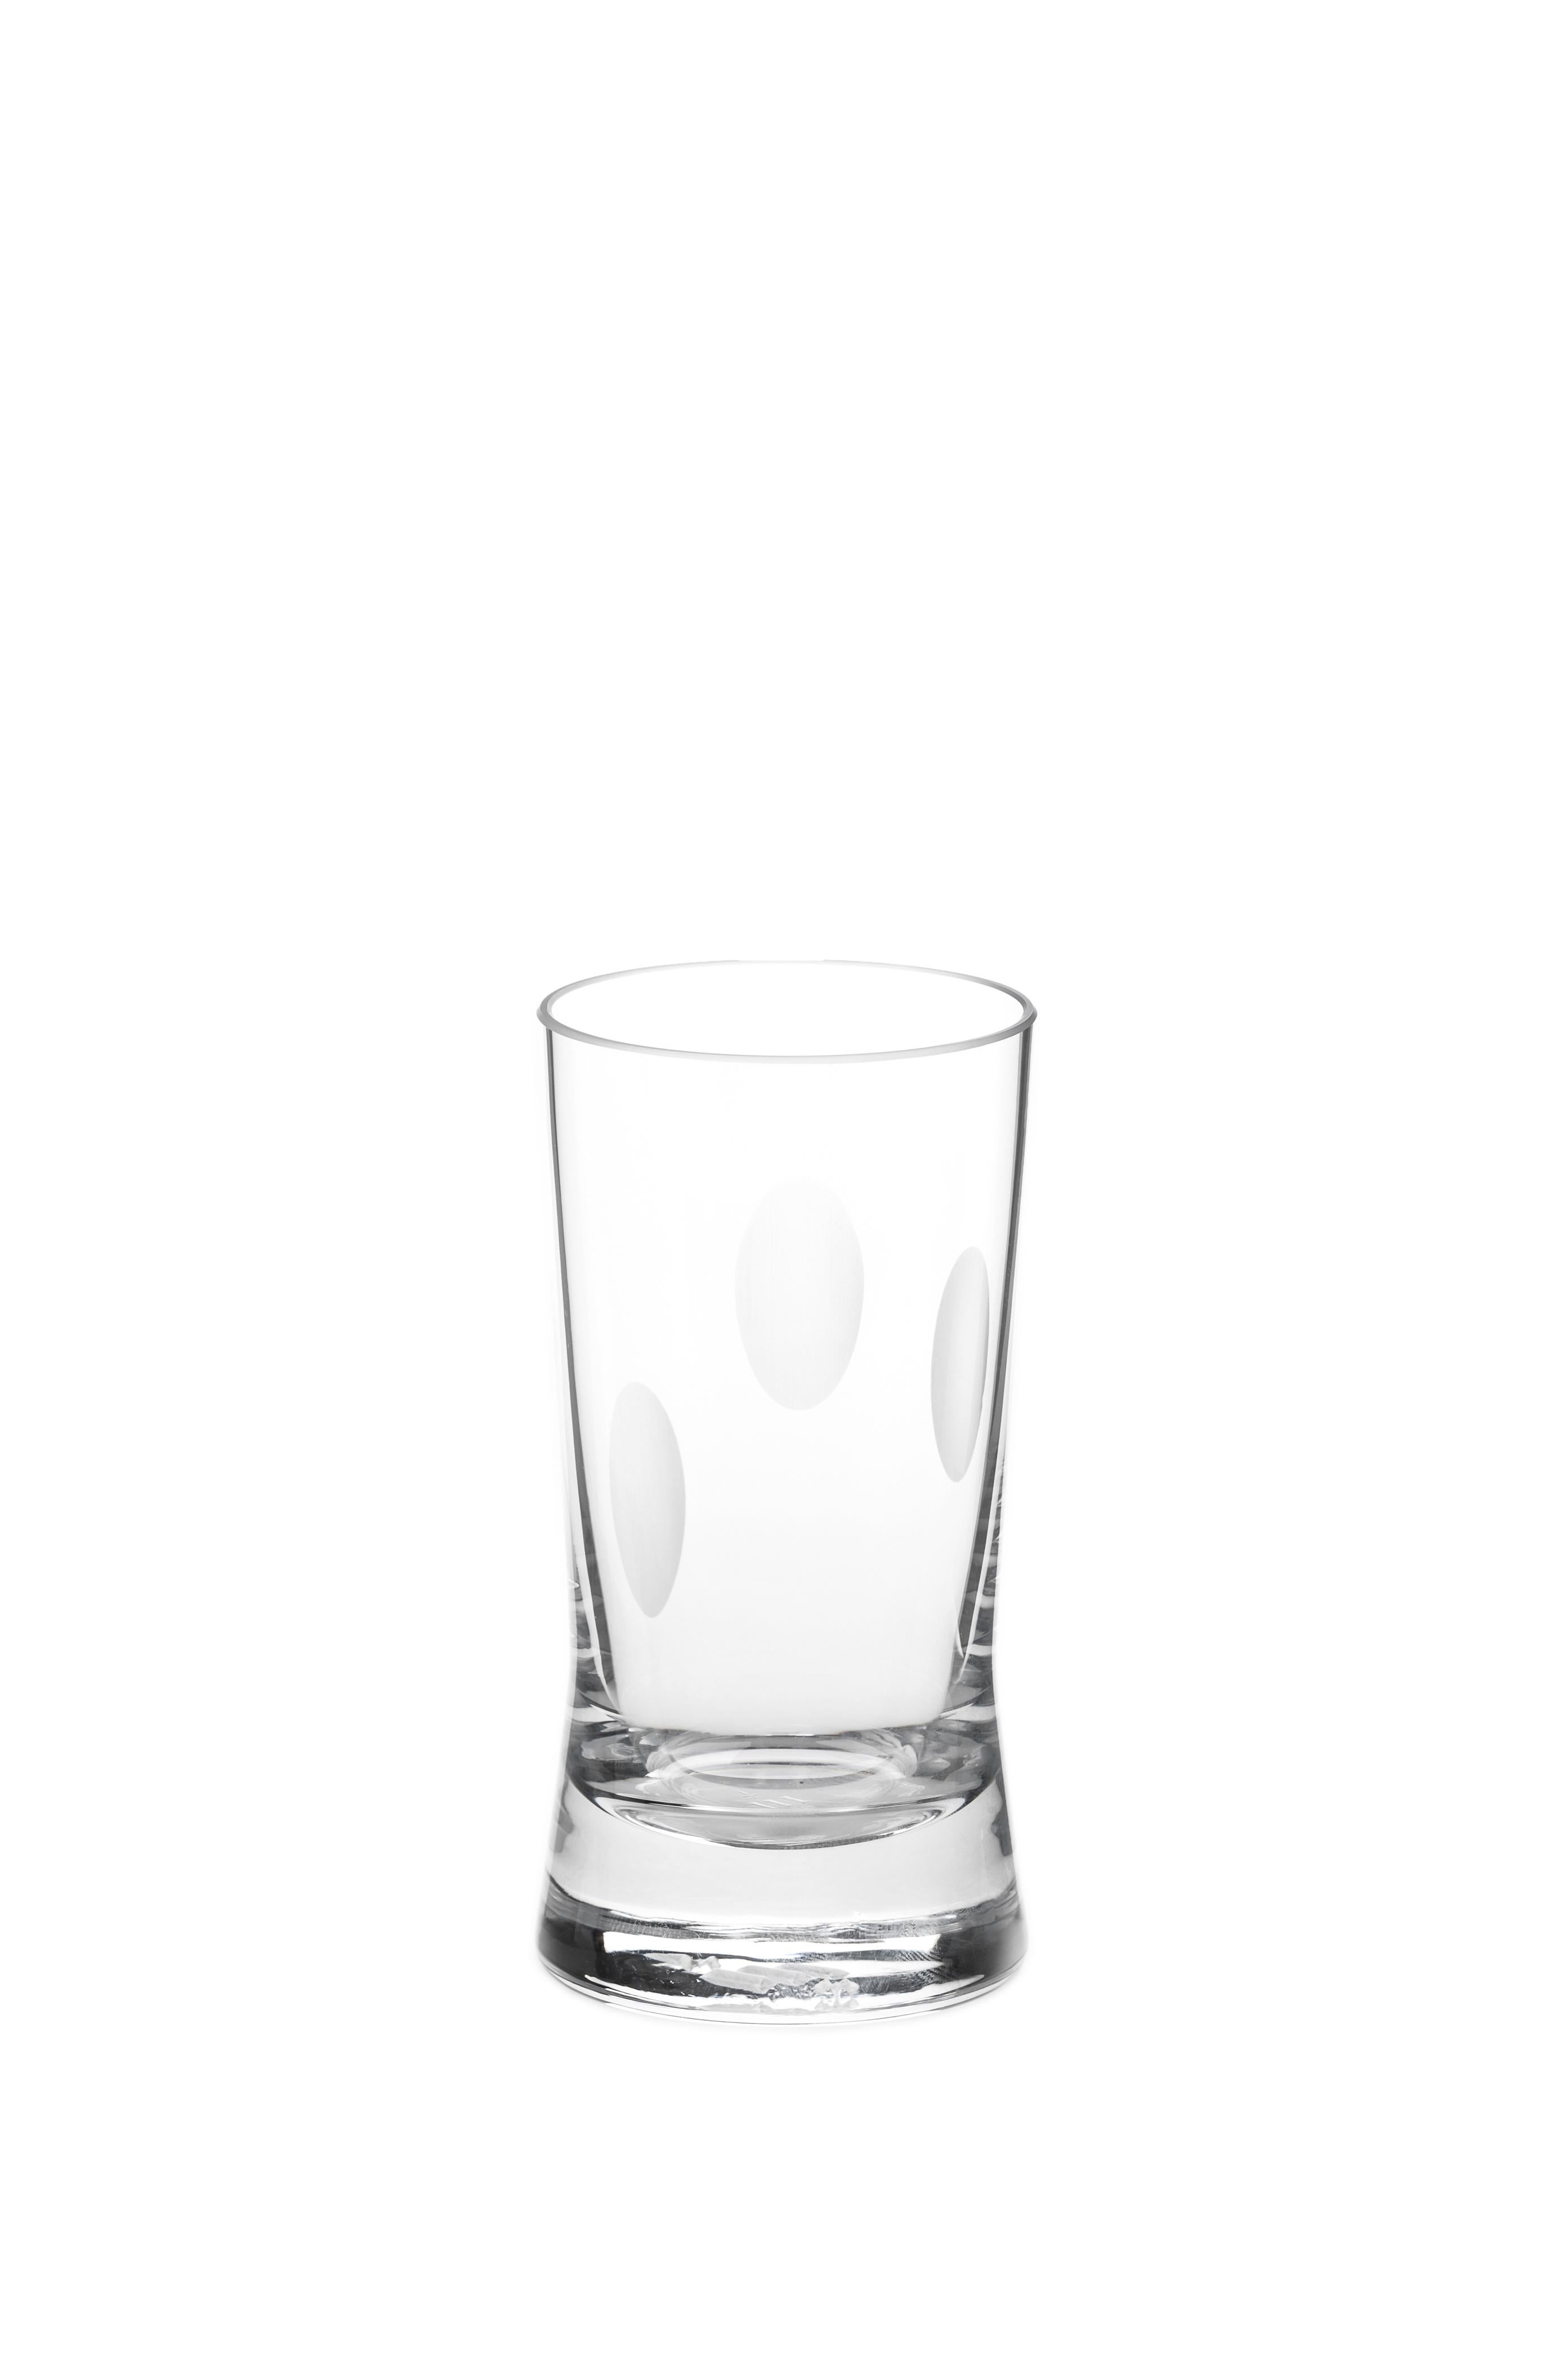 A water glass made by hand
Glass designed by Martino Gamper for J. HILL’s Standard as part of our 'CUTTINGS' collection.

The collection: Cuttings
Cuttings is a contemporary, award-winning collection of handmade crystal glasses in six different